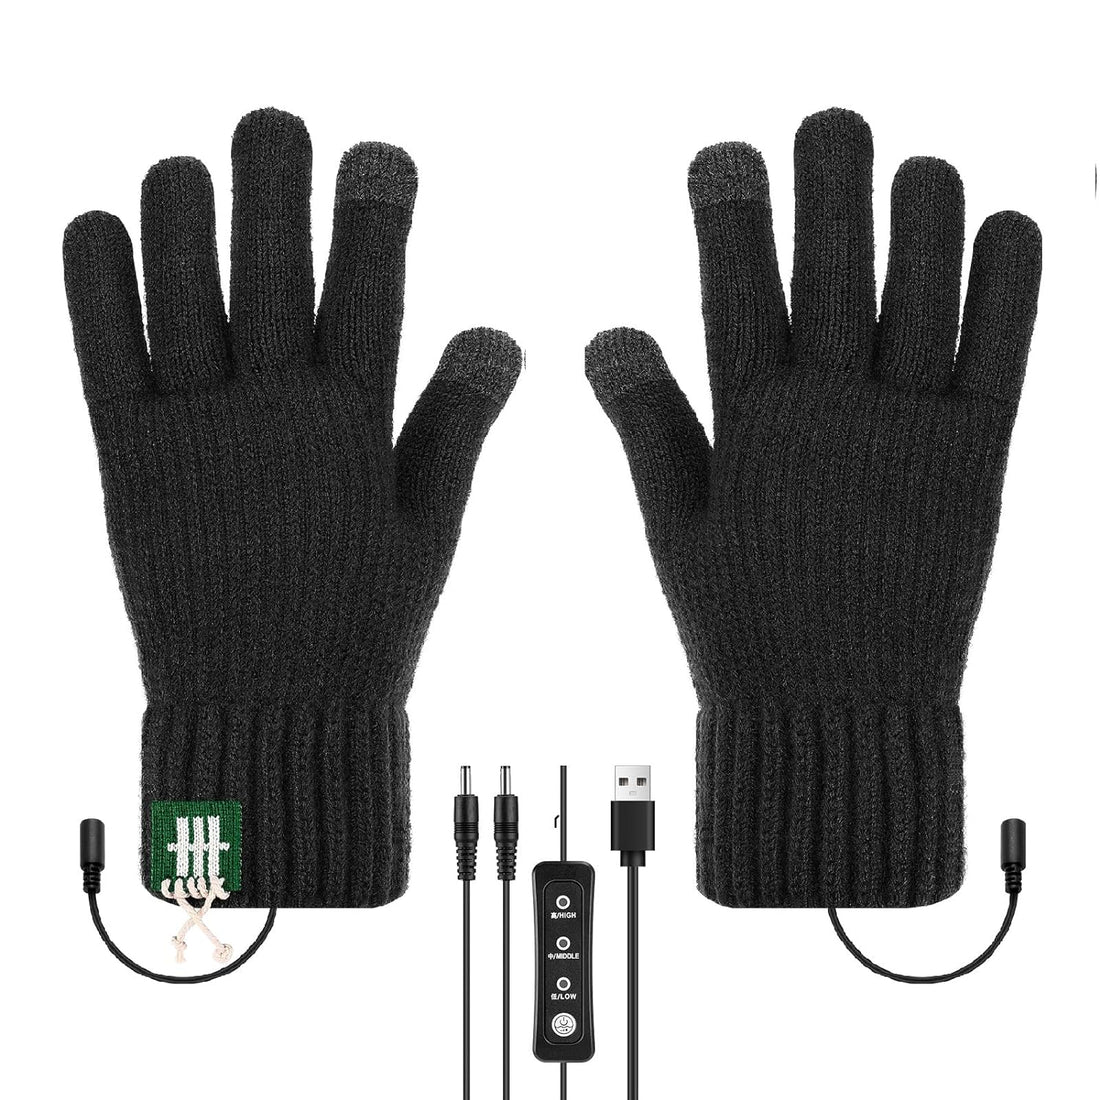 ACETOP USB Heated Gloves for Men and Women, Winter Warm Heating Gloves Full Hands Warmer with 3 Adjustable Temperature, Electric Touchscreen Gloves Washable Knitting Laptop Typing Gloves